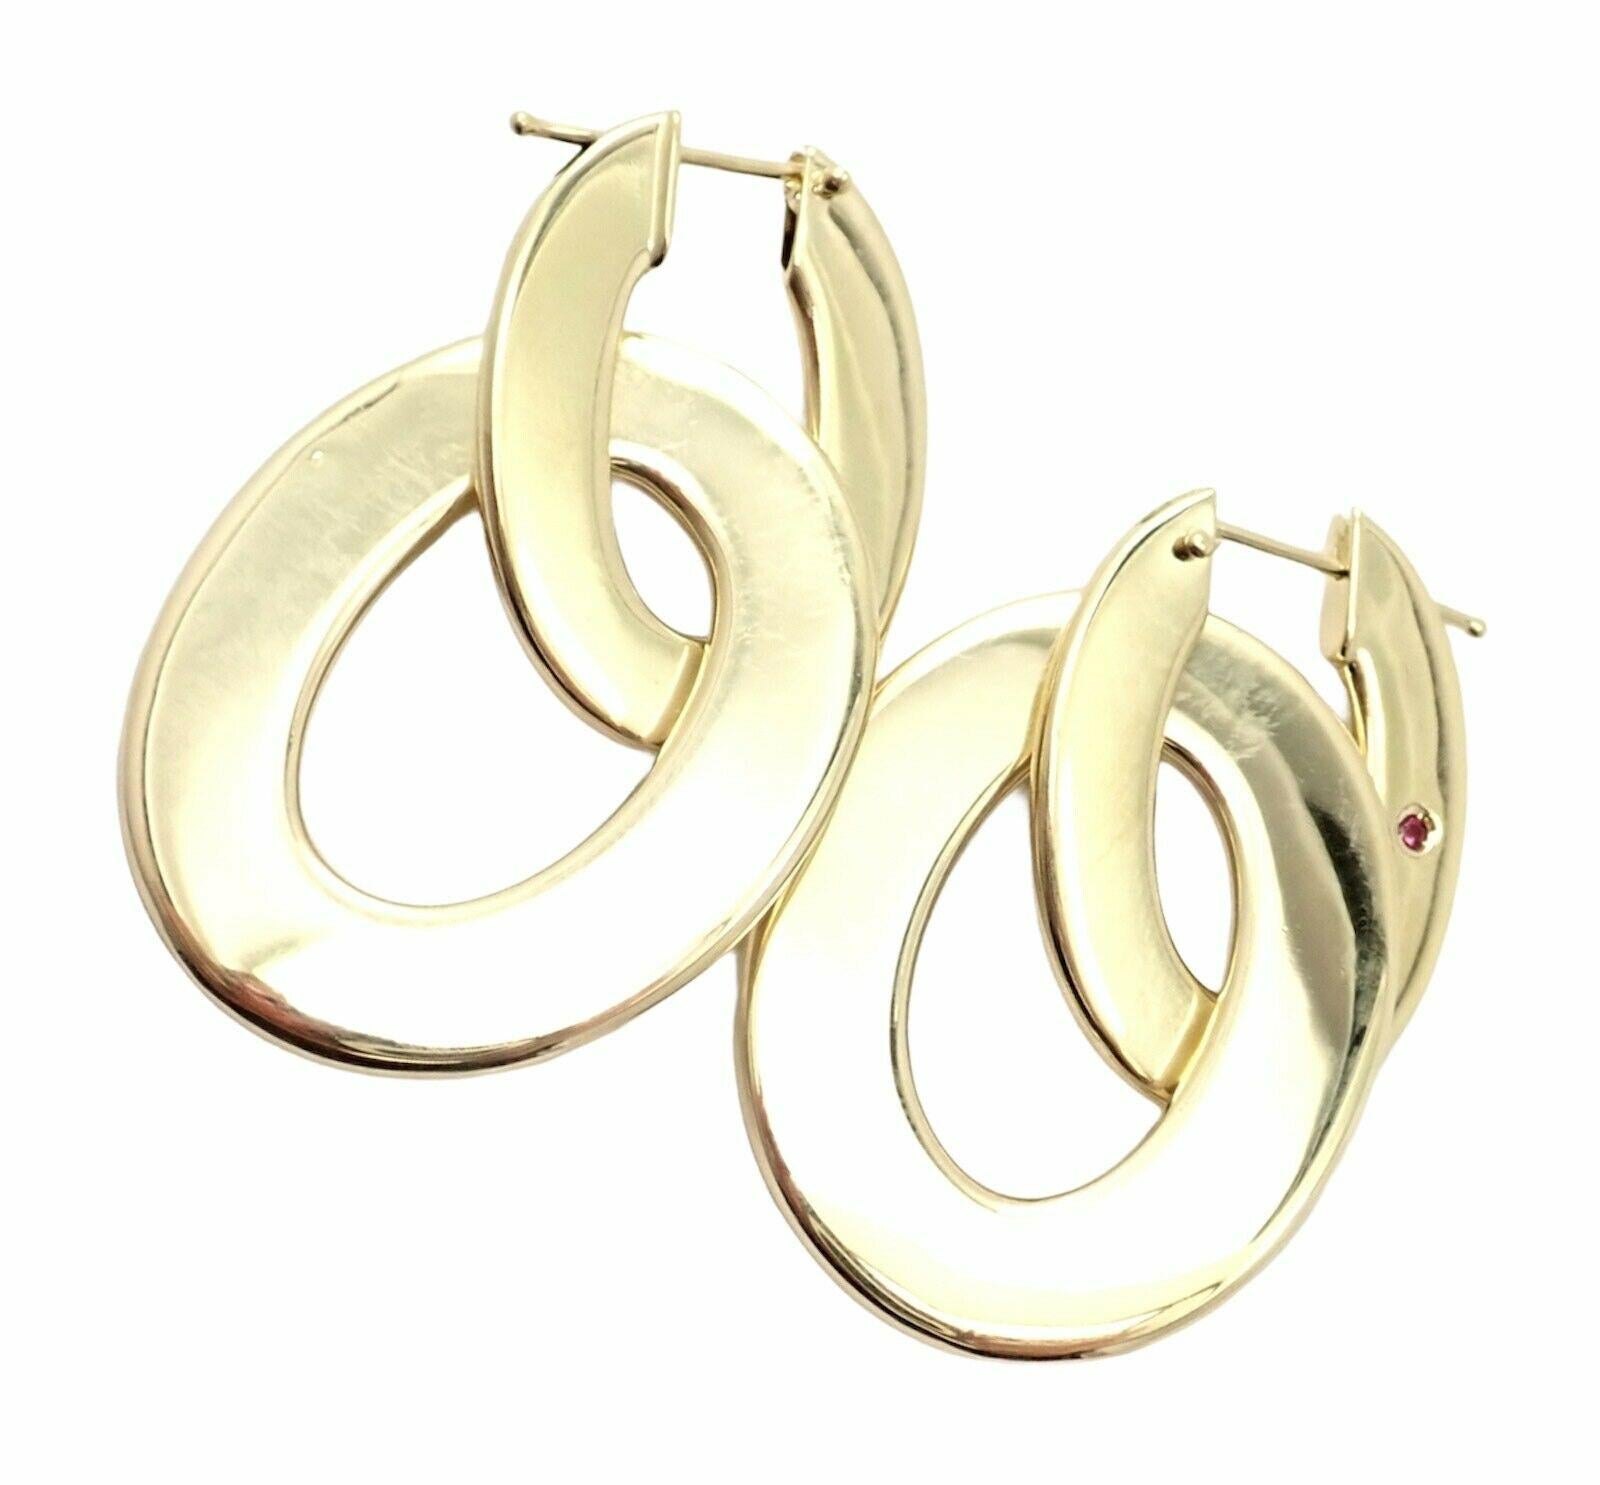 18k Yellow Gold Extra Large Link Chic And Shine Earrings by Roberto Coin. 
With round ruby
Details: 
Measurements: 27mm x 48mm
Weight: 16.3 grams
Stamped Hallmarks: Roberto Coin 750 Italy 1226VI 2xRuby 
*Free Shipping within the United States*
YOUR